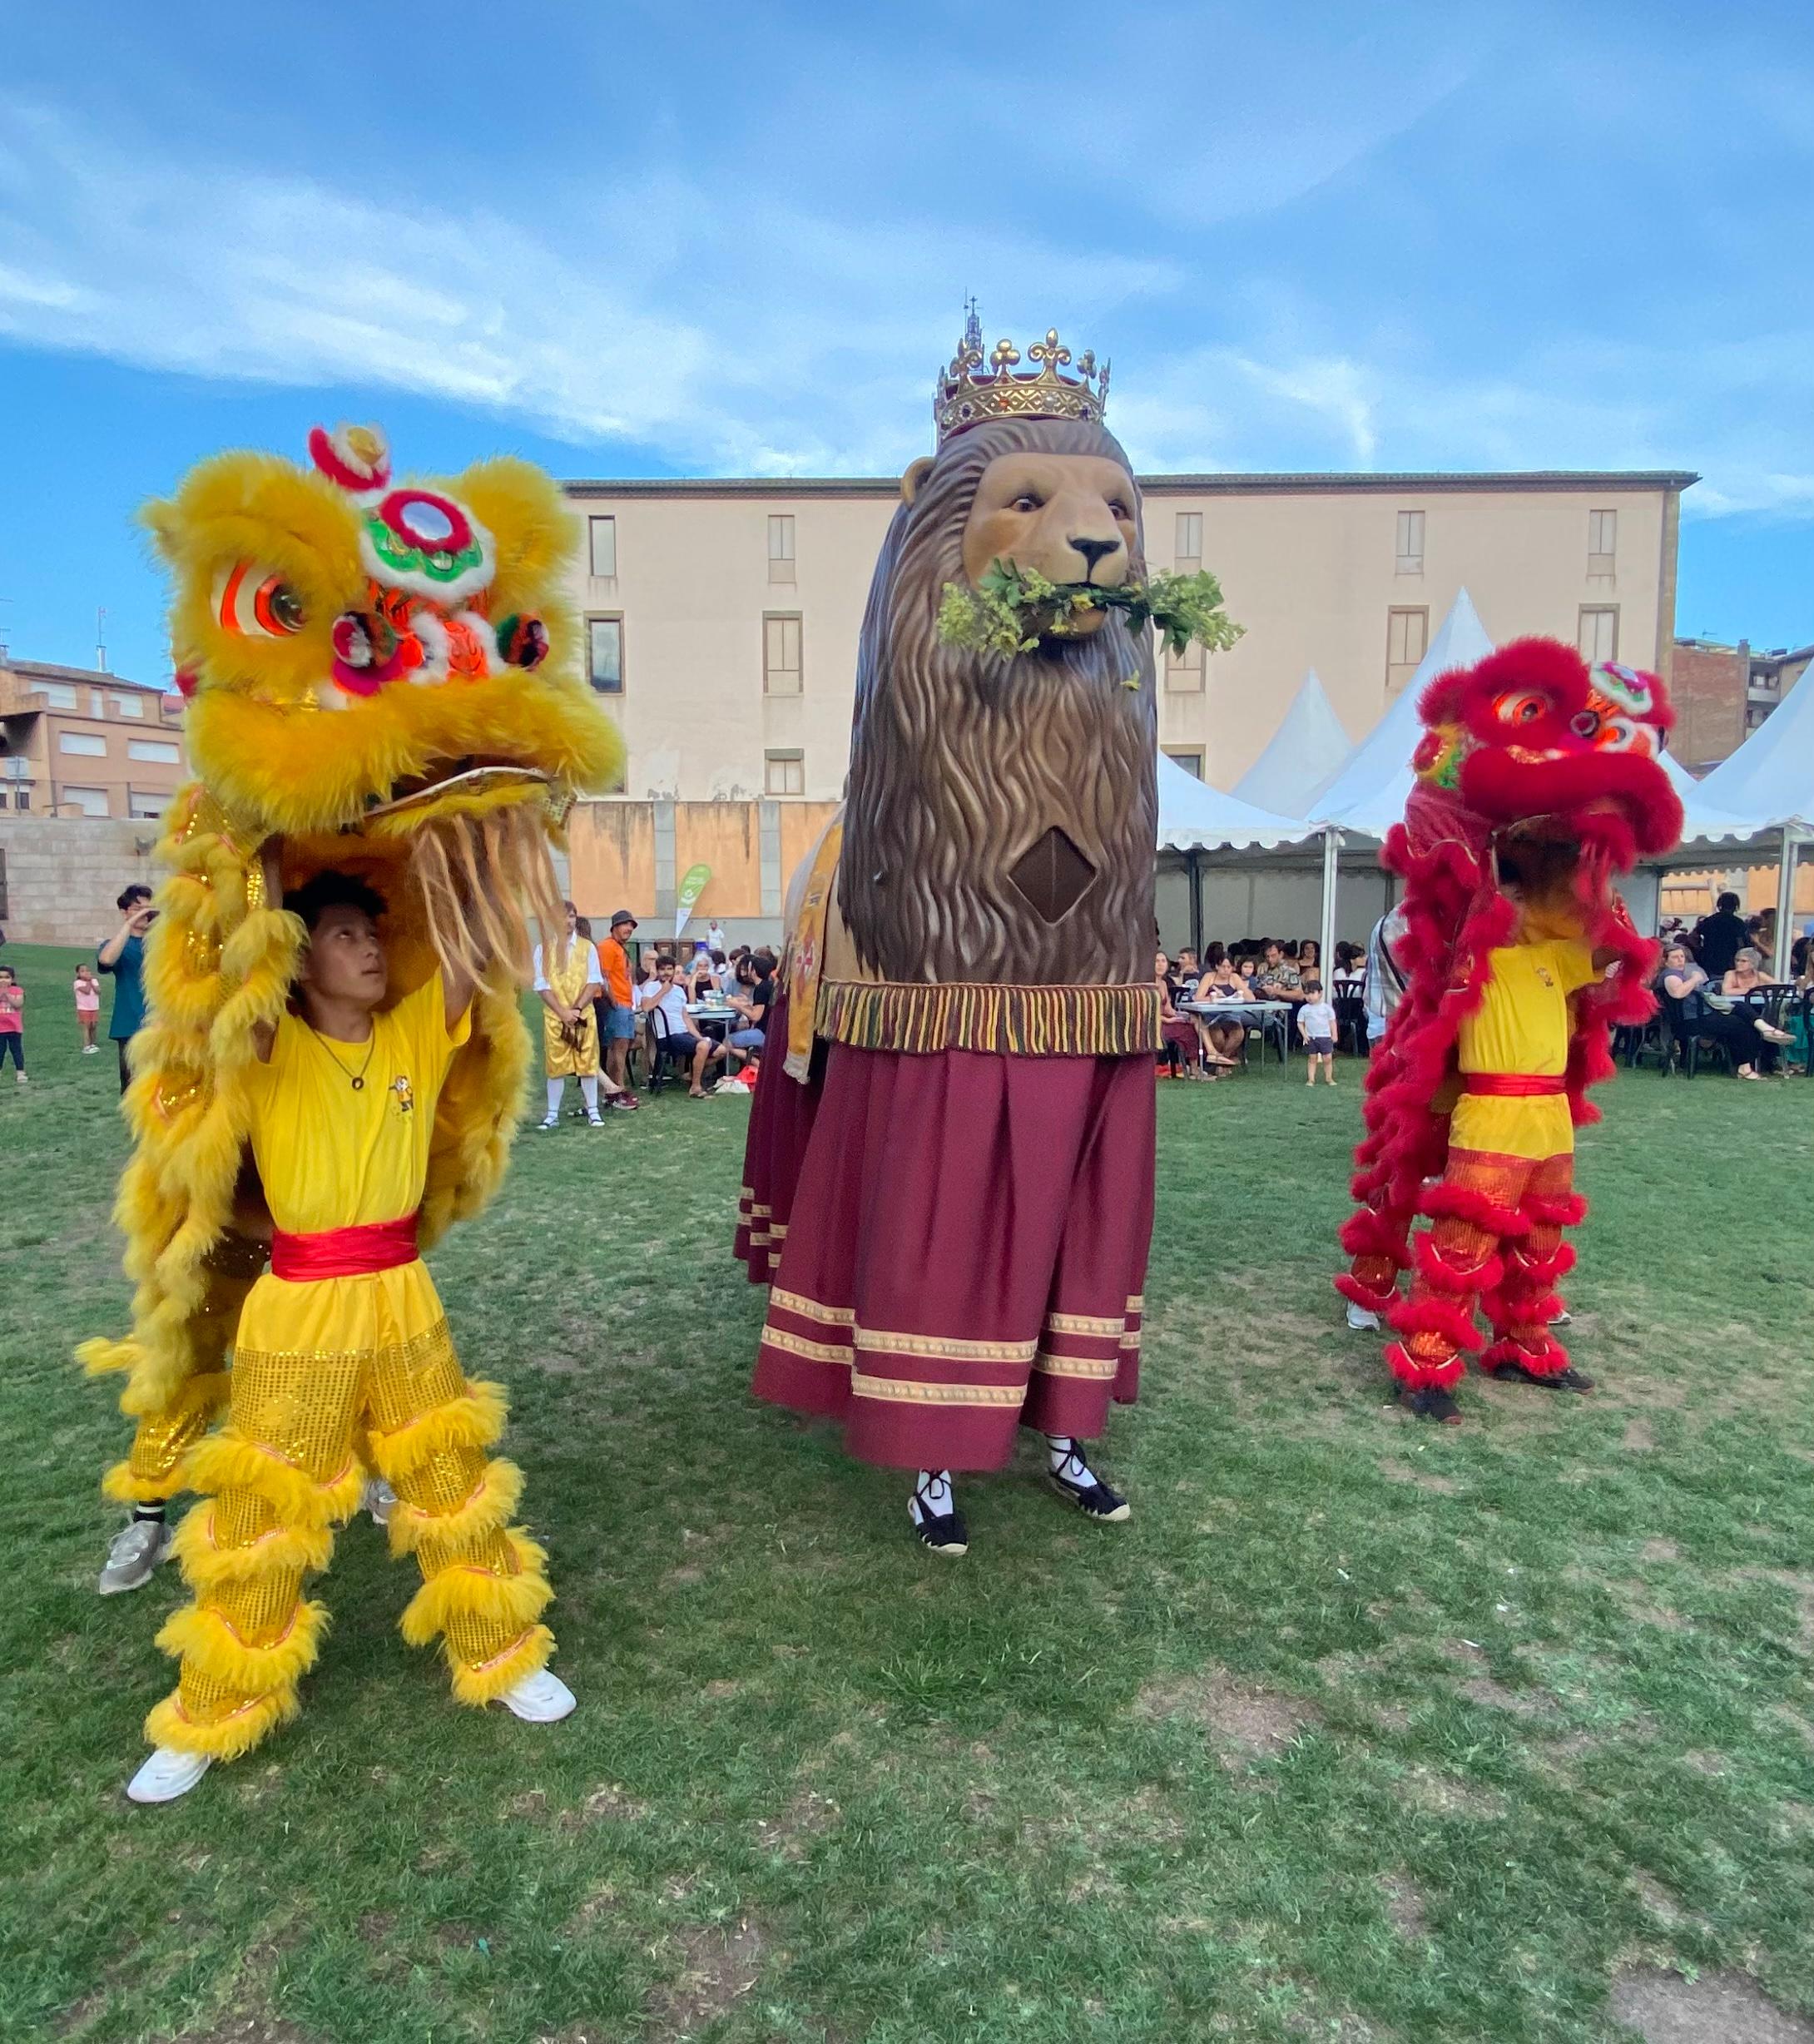 The Hong Kong Economic and Trade Office in Brussels and Create Hong Kong supported the 19th Asian Summer Film Festival in Vic, Spain, from July 19 to 24. Photo shows a lion from Vic's traditional folklore dancing with two Hong Kong lions during the "Hong Kong night" on July 19 (Vic time).